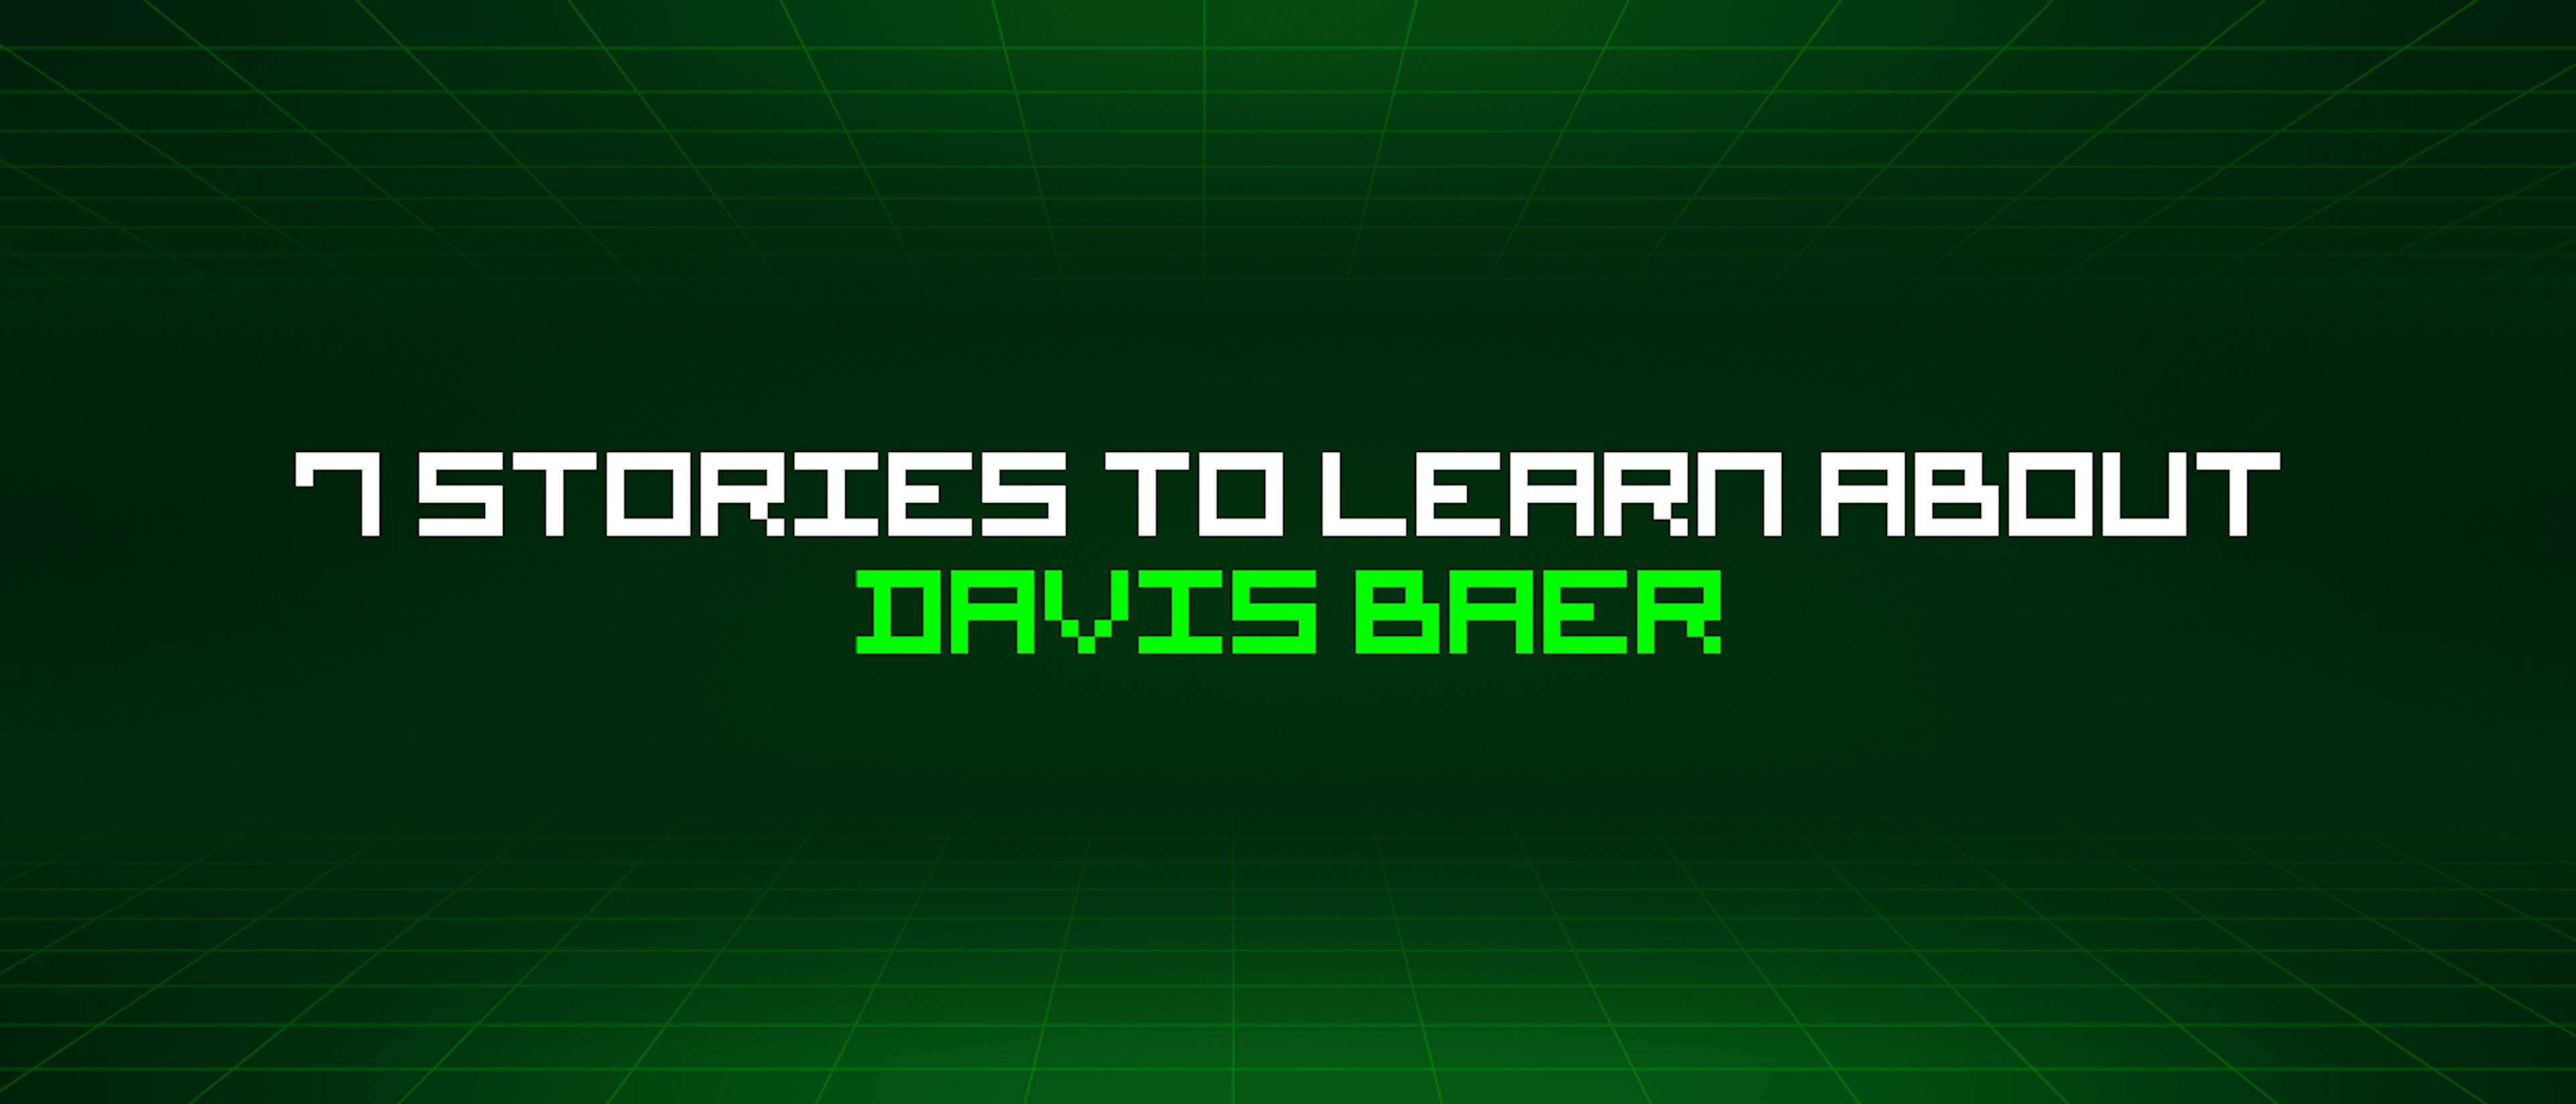 featured image - 7 Stories To Learn About Davis Baer